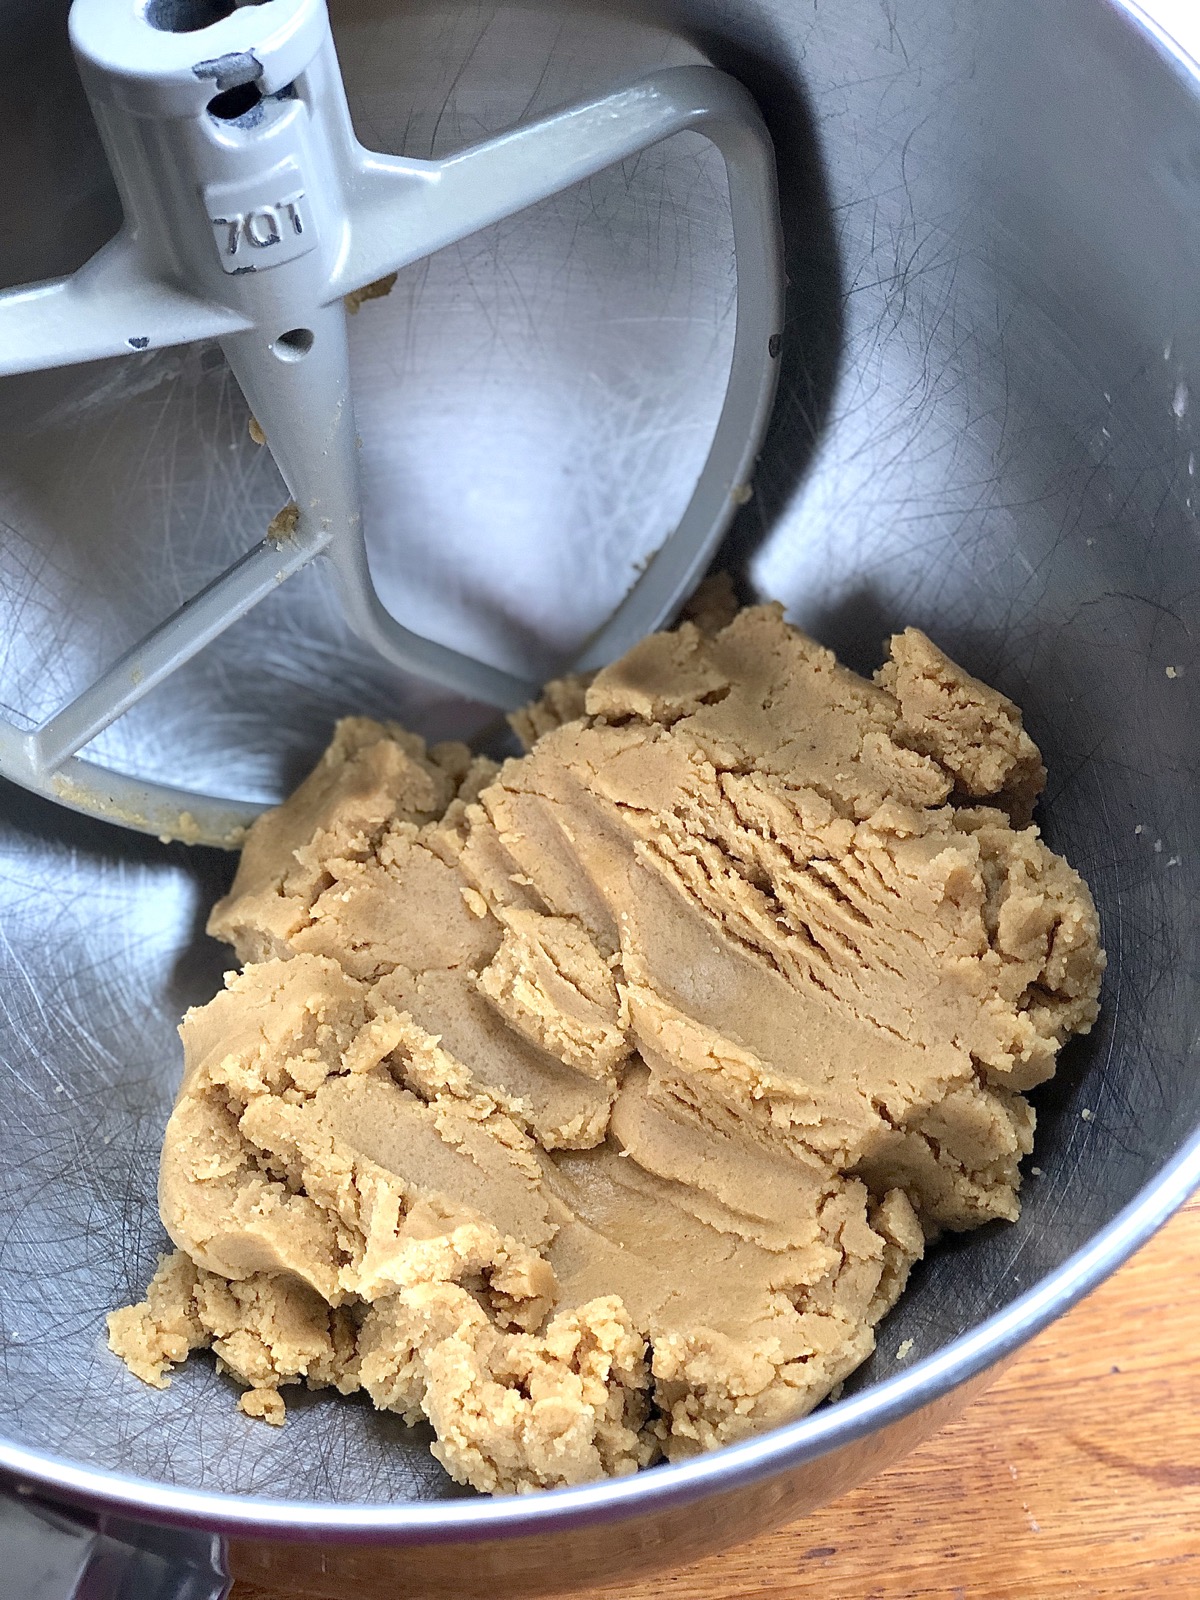 Peanut butter cookie dough in a mixing bowl.